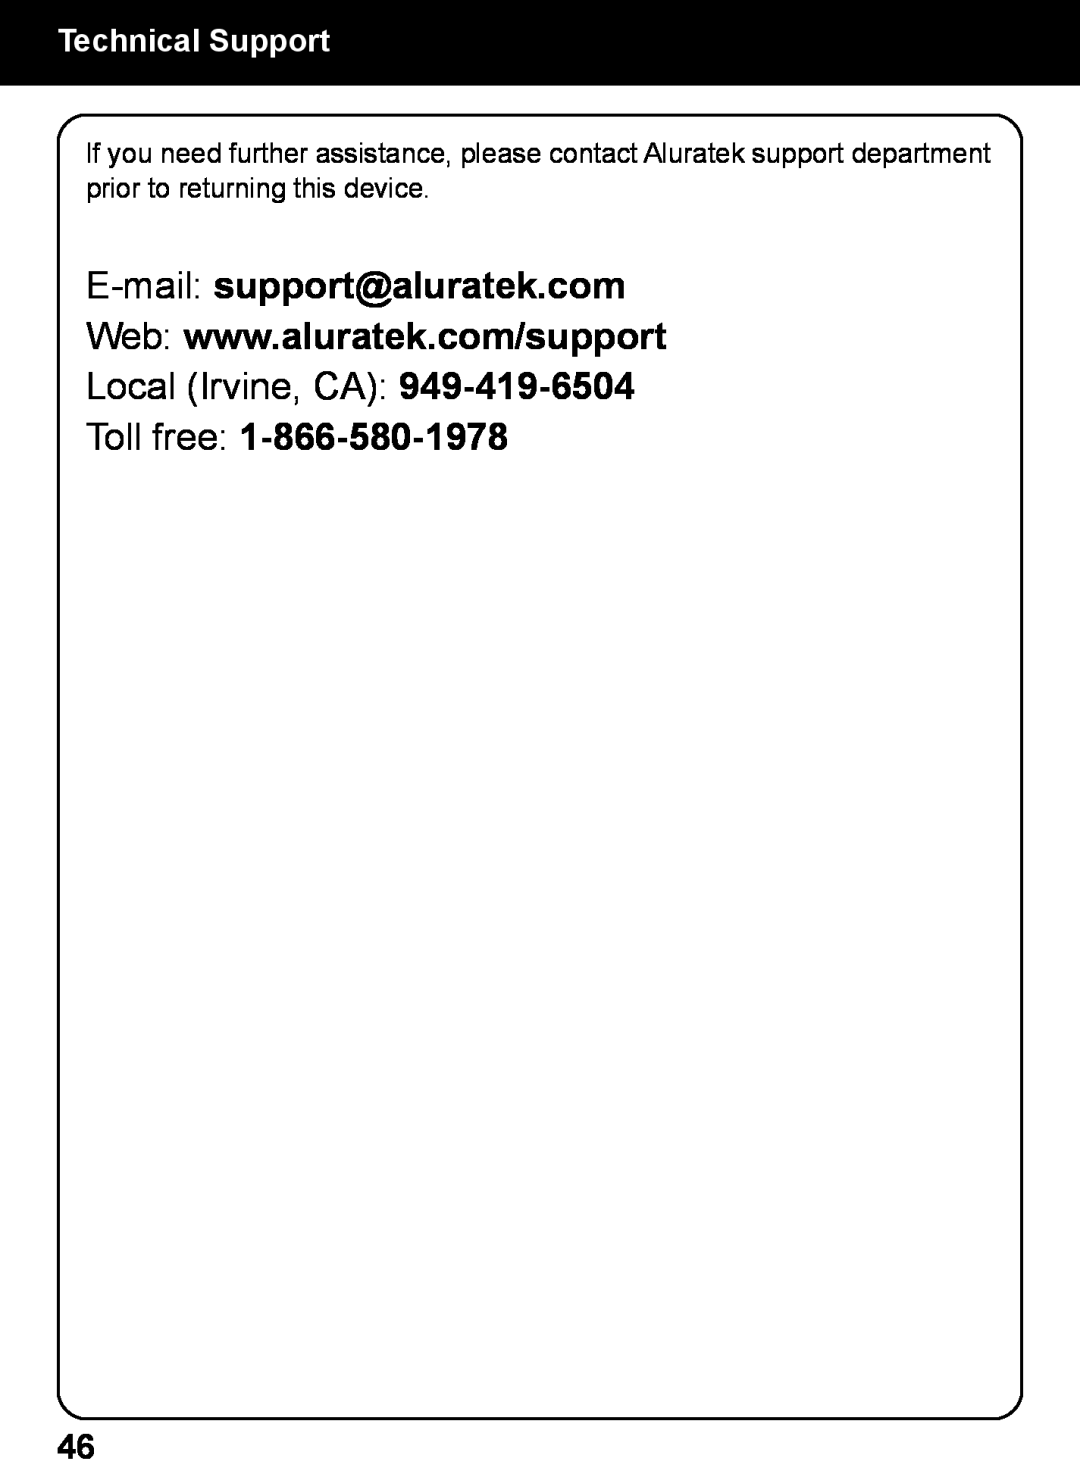 Aluratek AIREC01F manual Technical Support, Local Irvine, CA, Toll free 